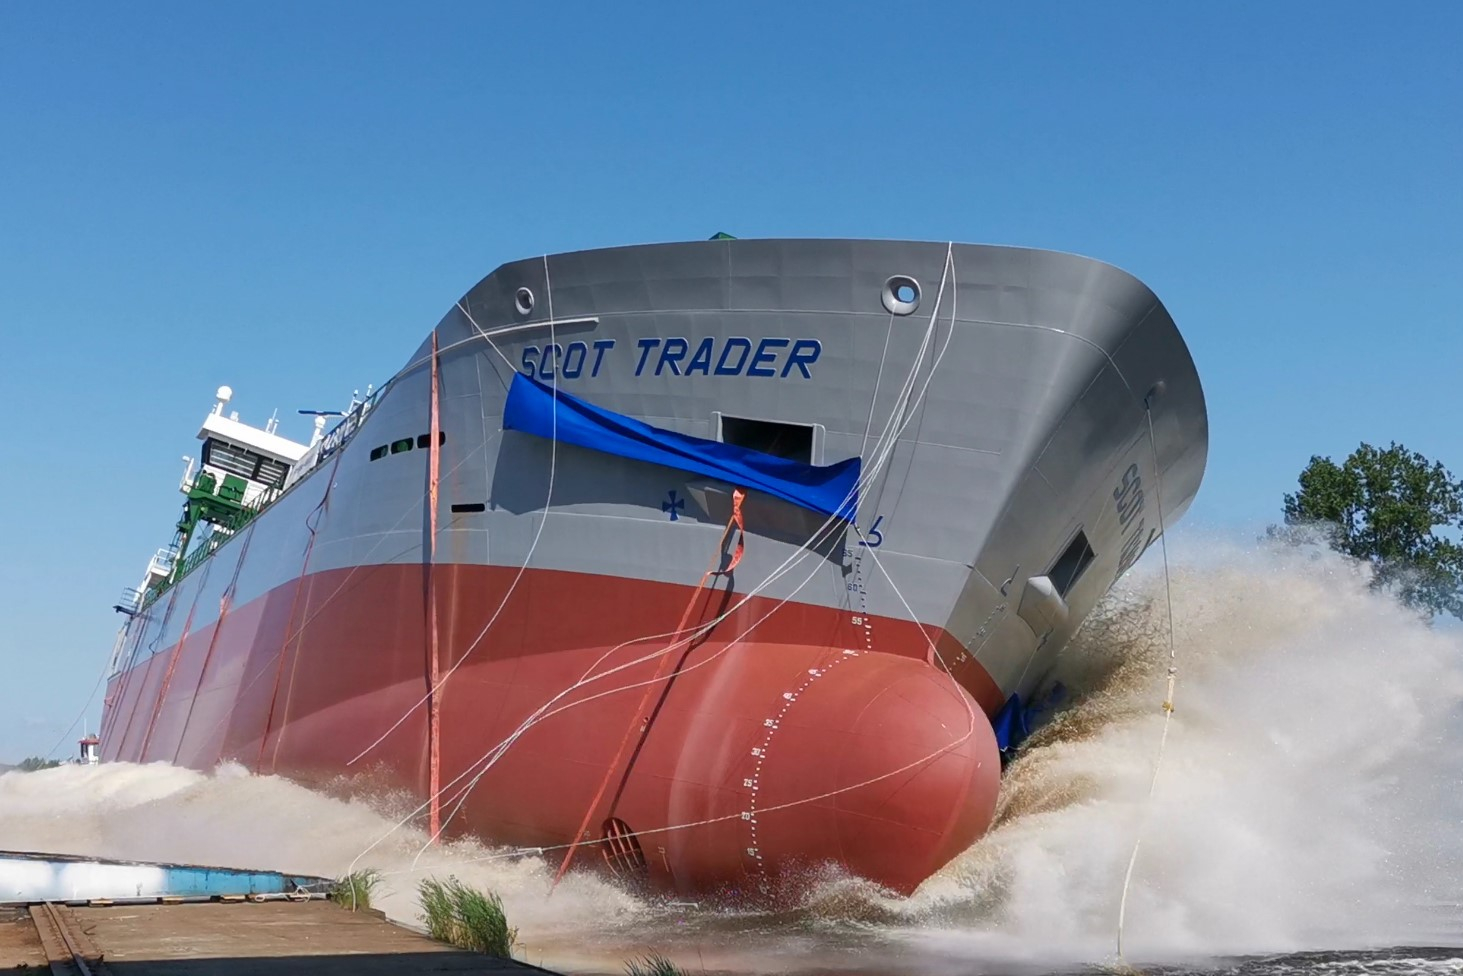 The launching of the vessel SCOT TRADER